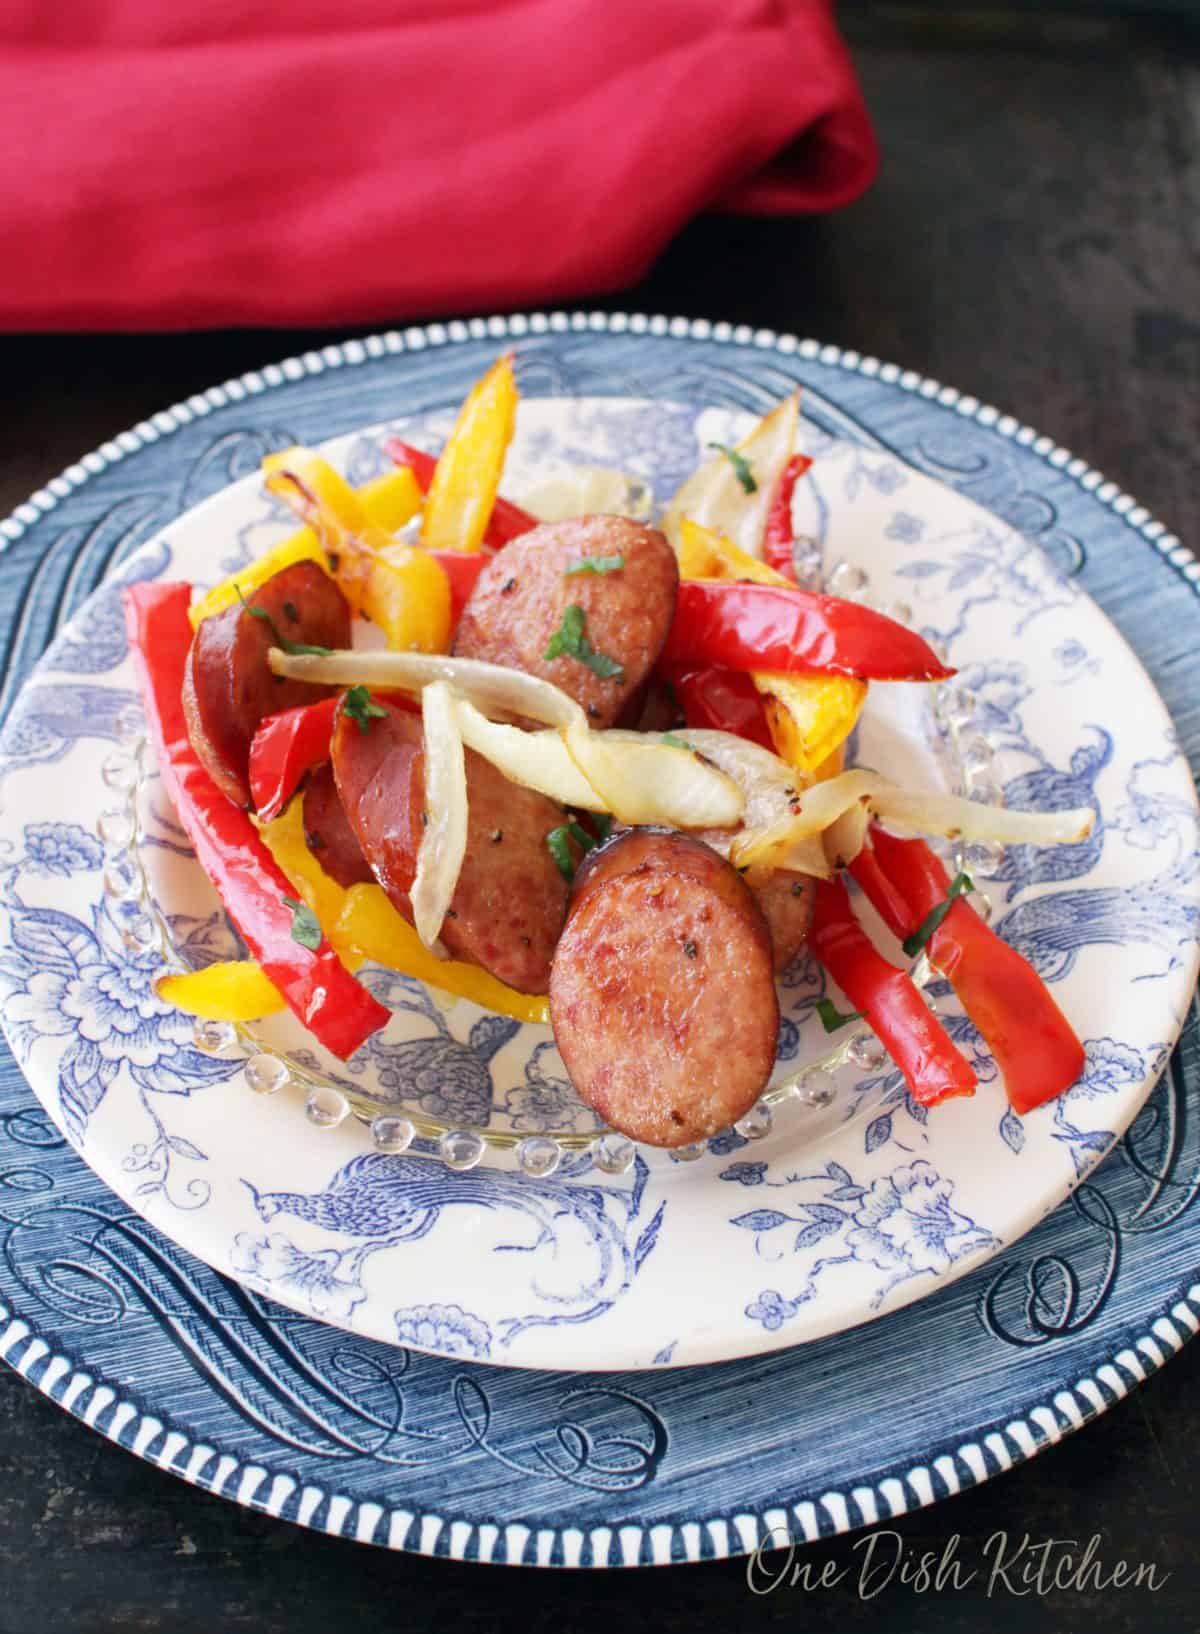 Sliced roasted sausage, red and yellow peppers, and onions on a plate.